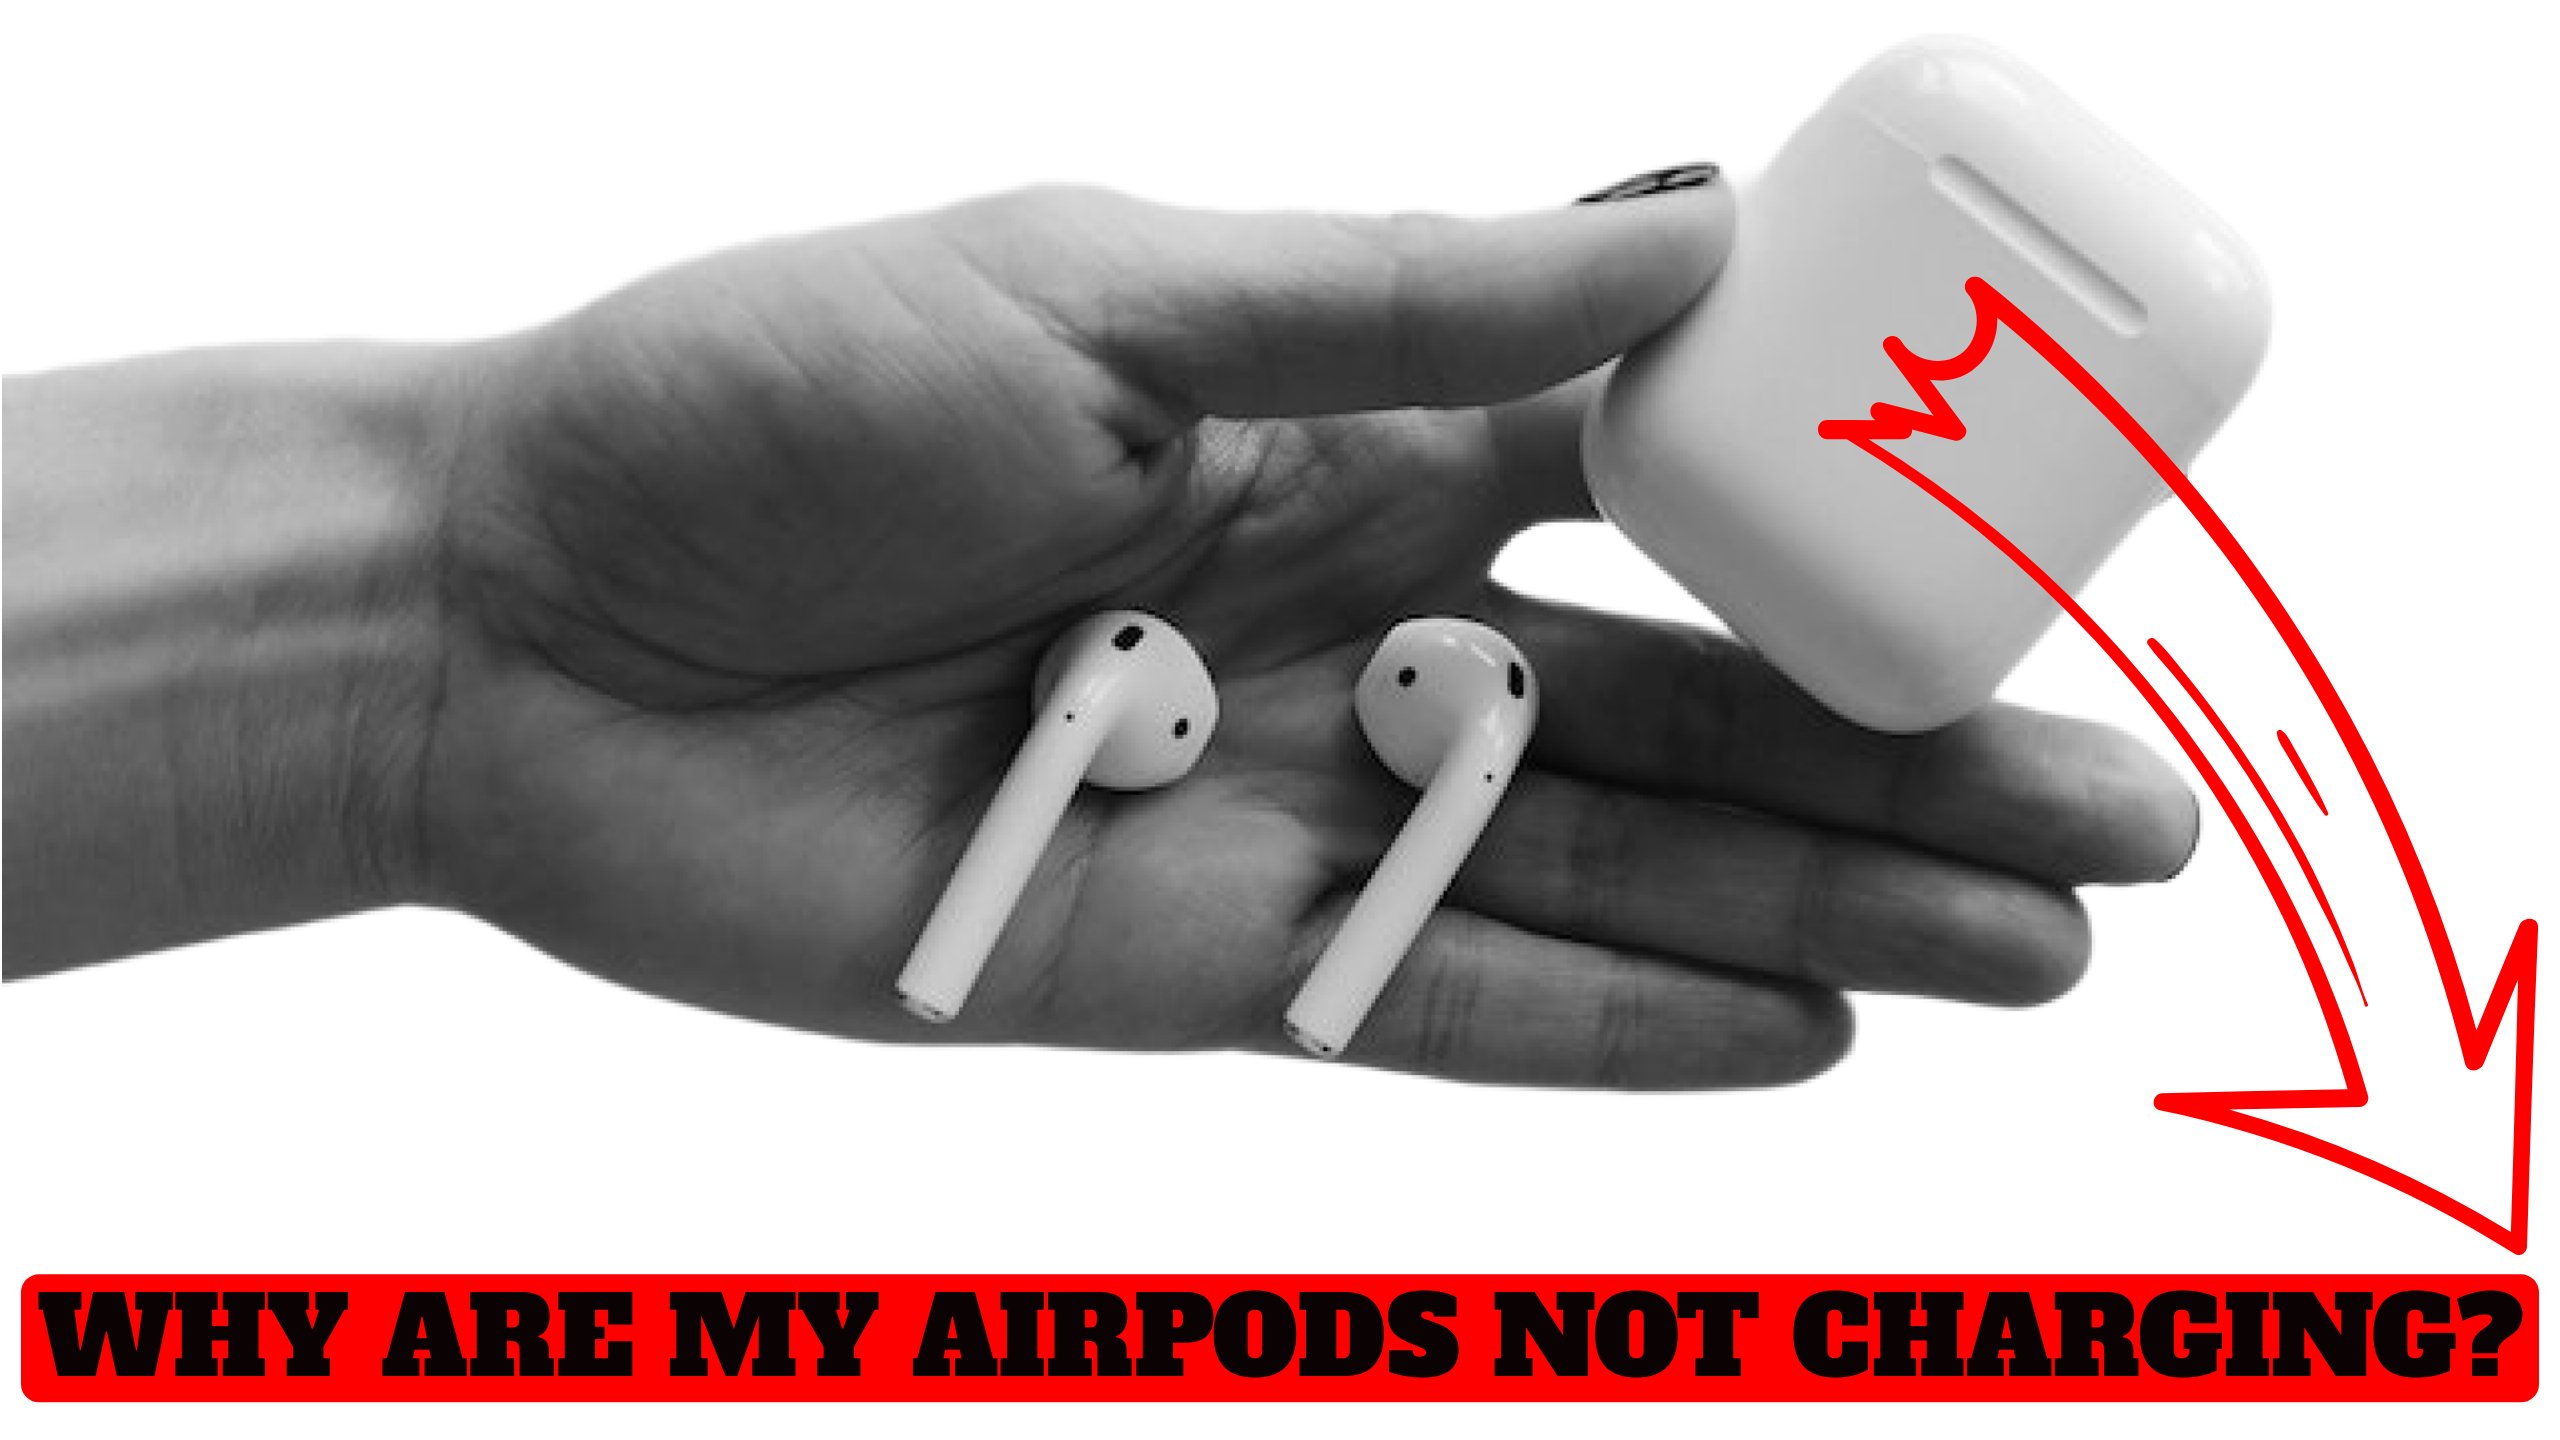 Why Are My AirPods Not Charging?